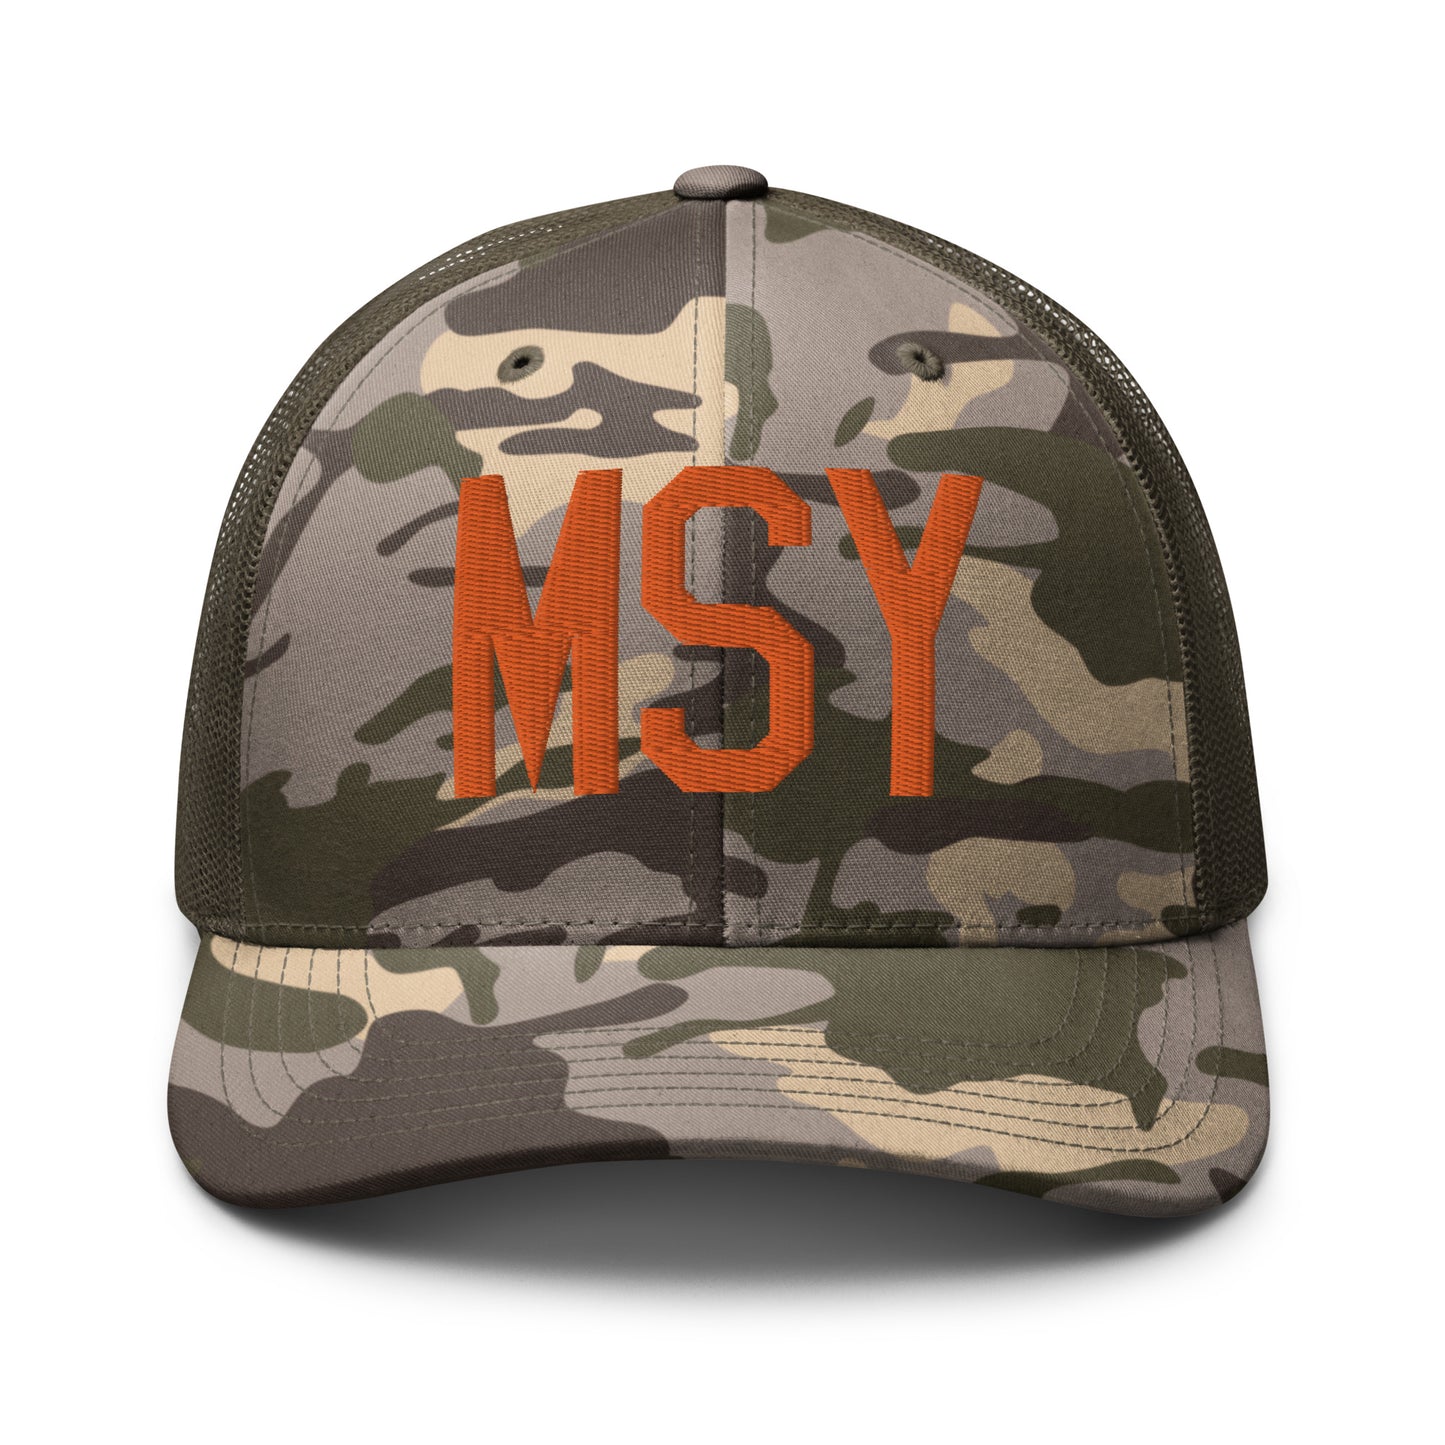 Airport Code Camouflage Trucker Hat - Orange • MSY New Orleans • YHM Designs - Image 17